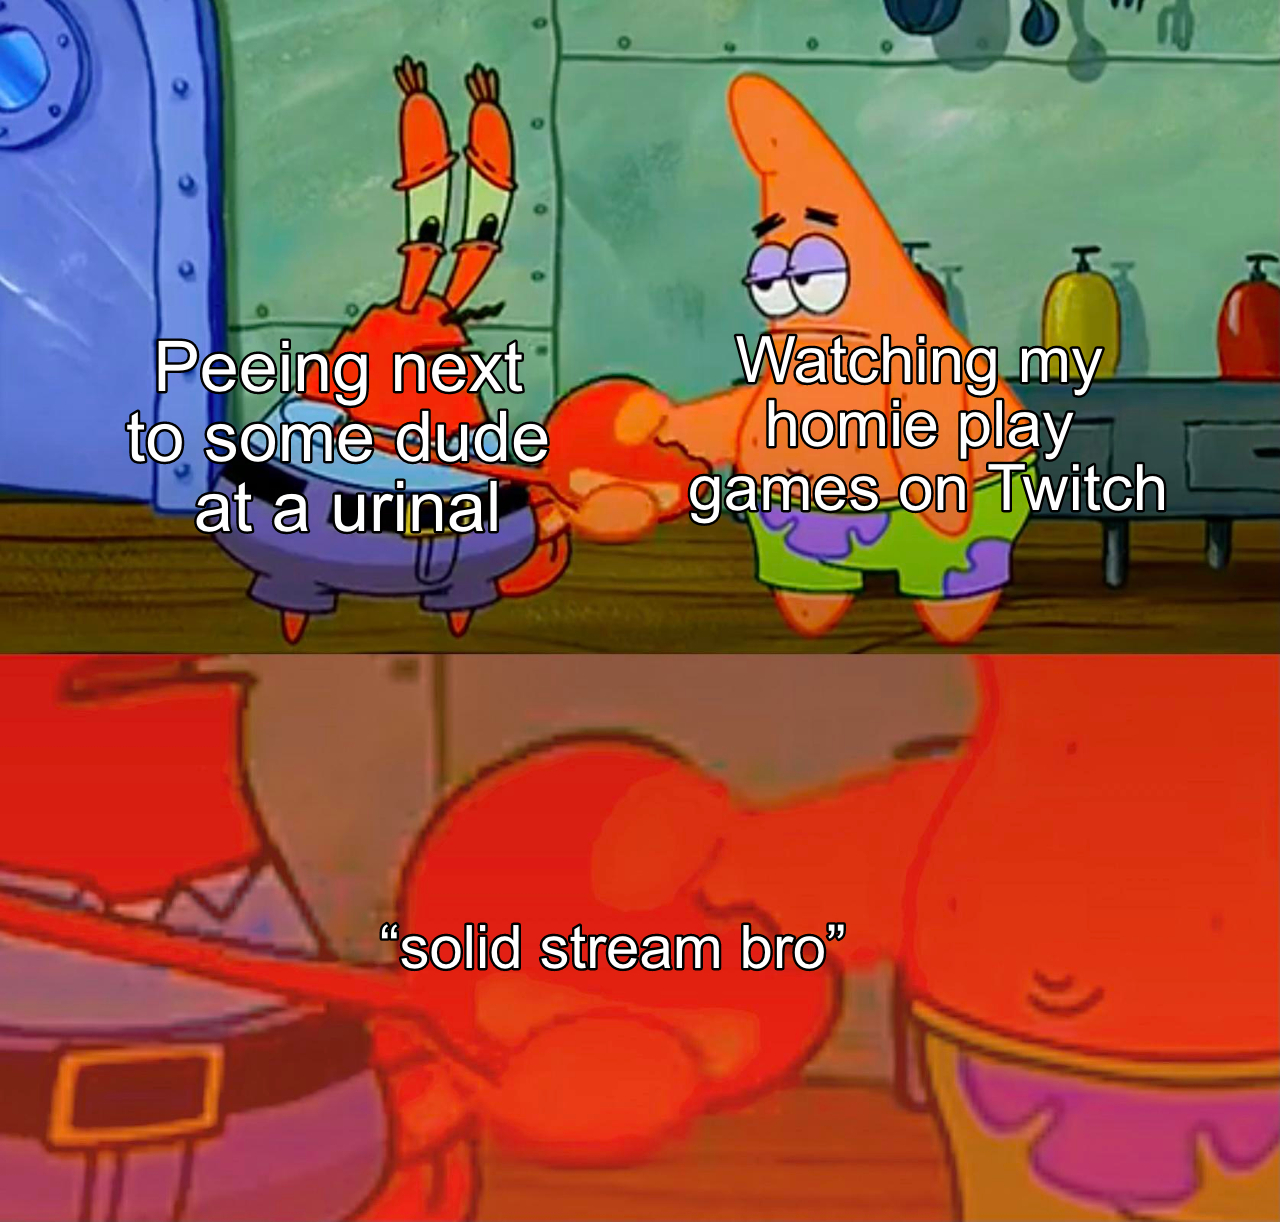 funny memes - dank memes patrick mr krabs handshake - Peeing next to some dude at a urinal Watching my homie play games on Twitch "solid stream bro"